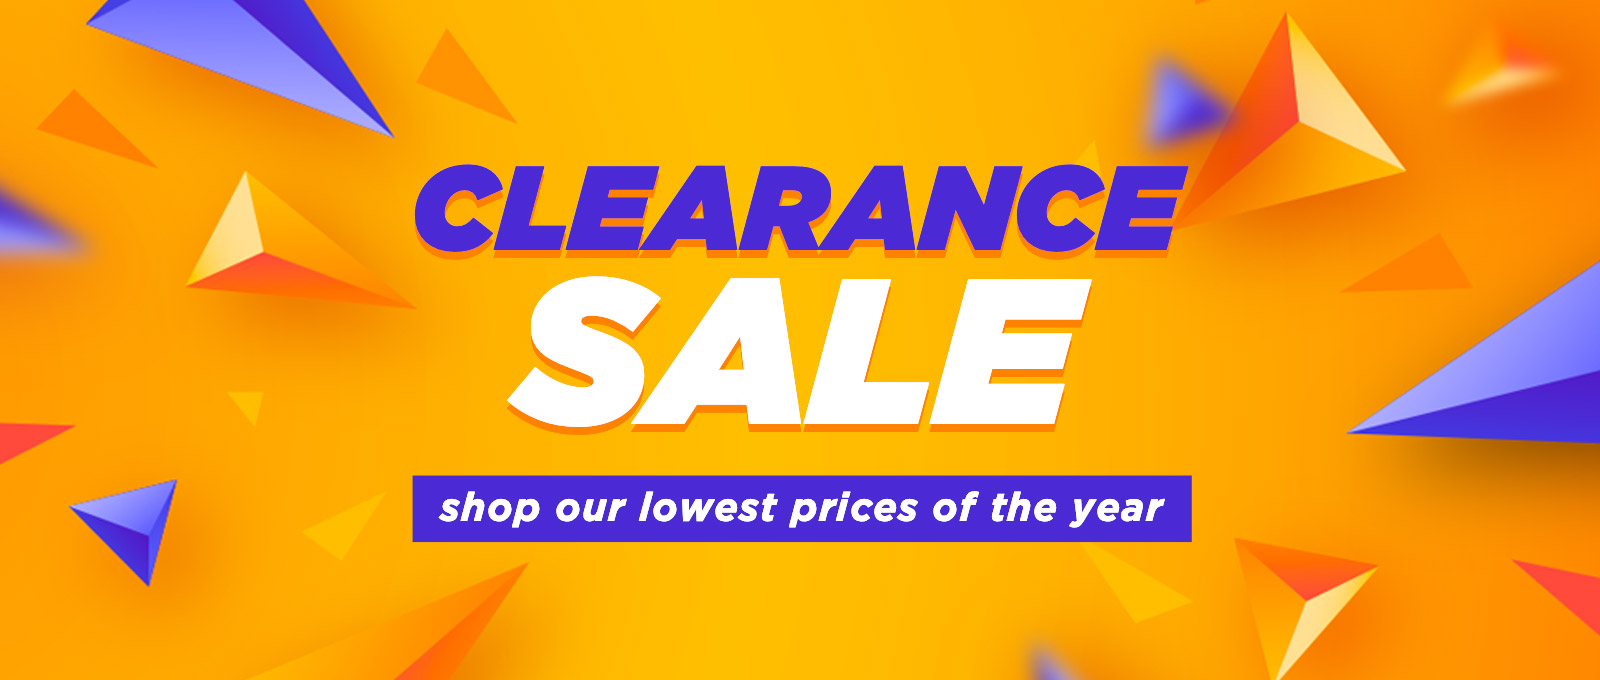 Clearance Sale - Shop Our Lowest Prices of the Year